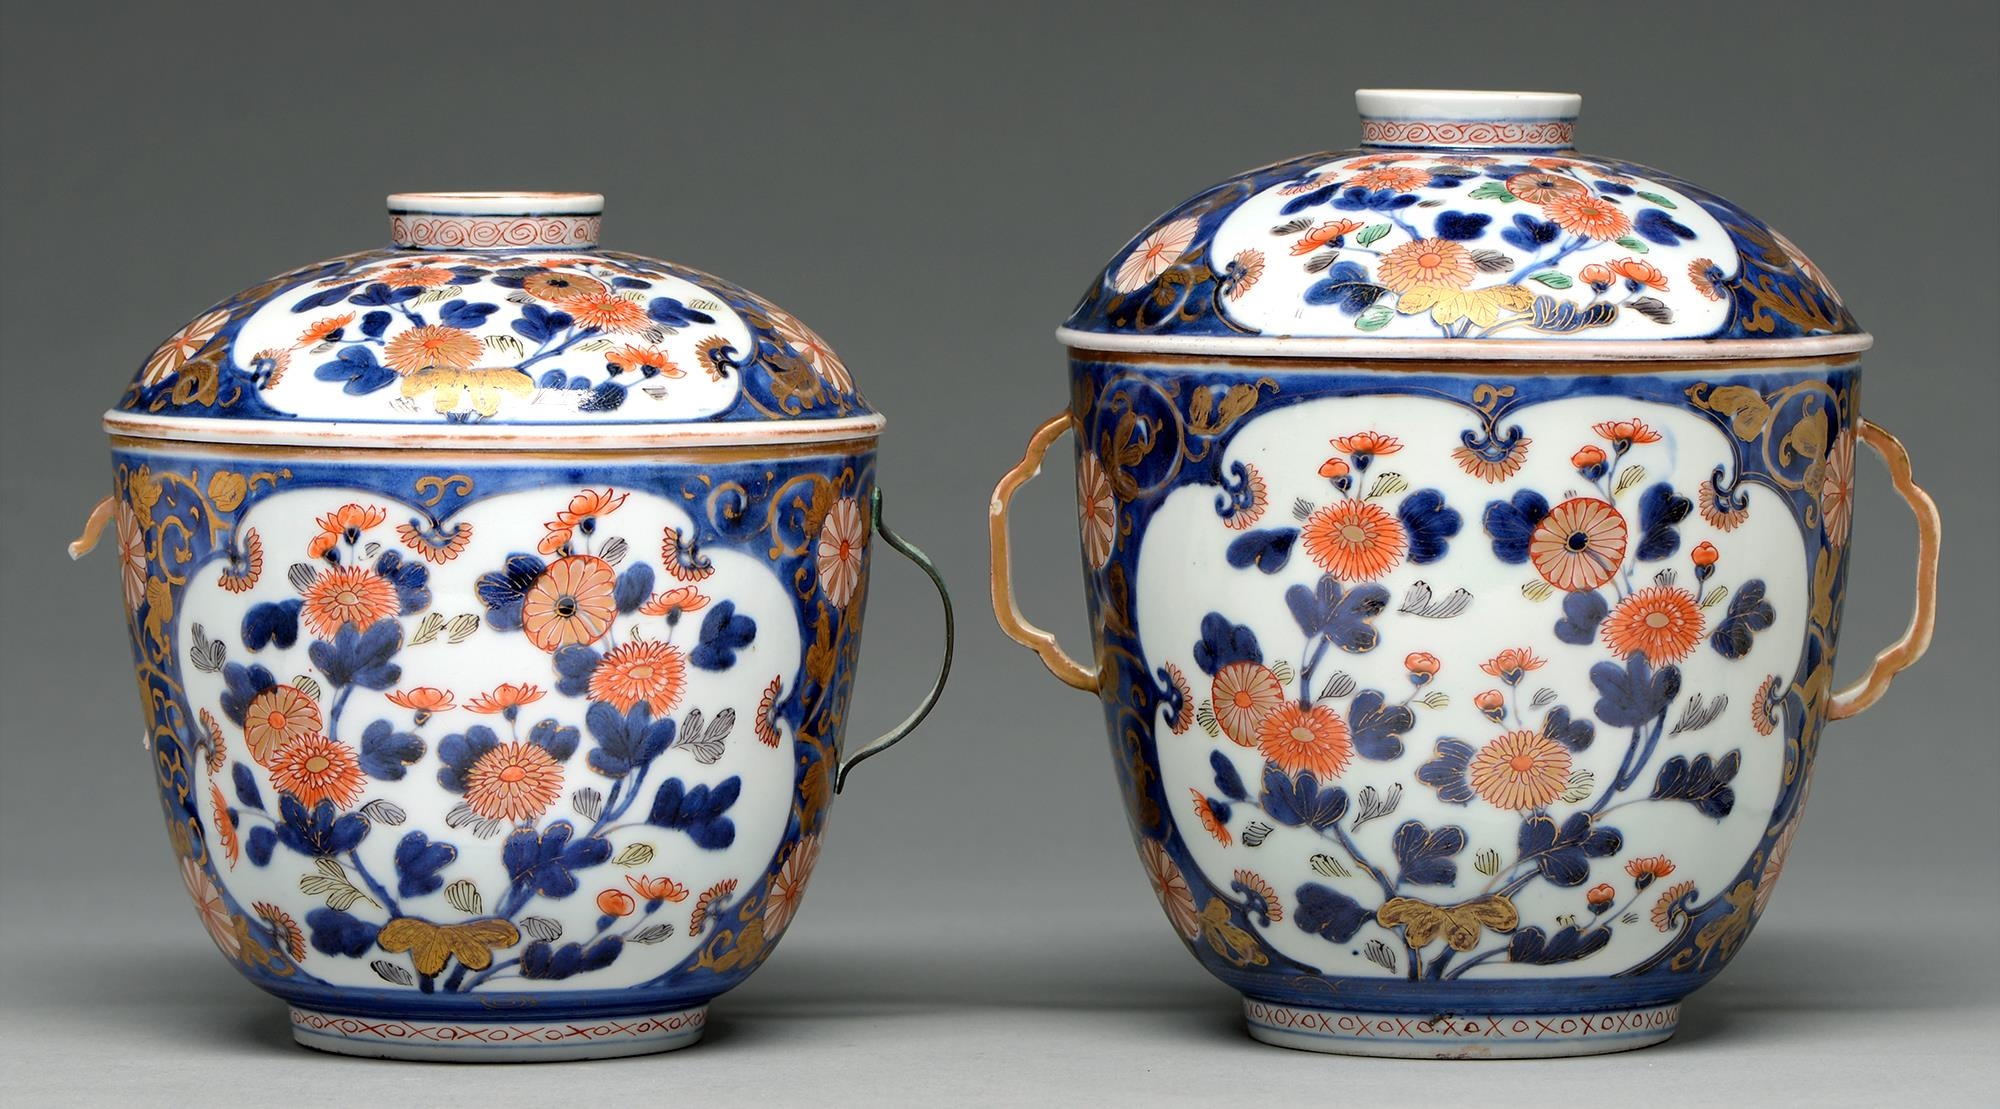 Two Chinese Imari tureens and covers, Edo period,  early 18th c, painted in underglaze blue,